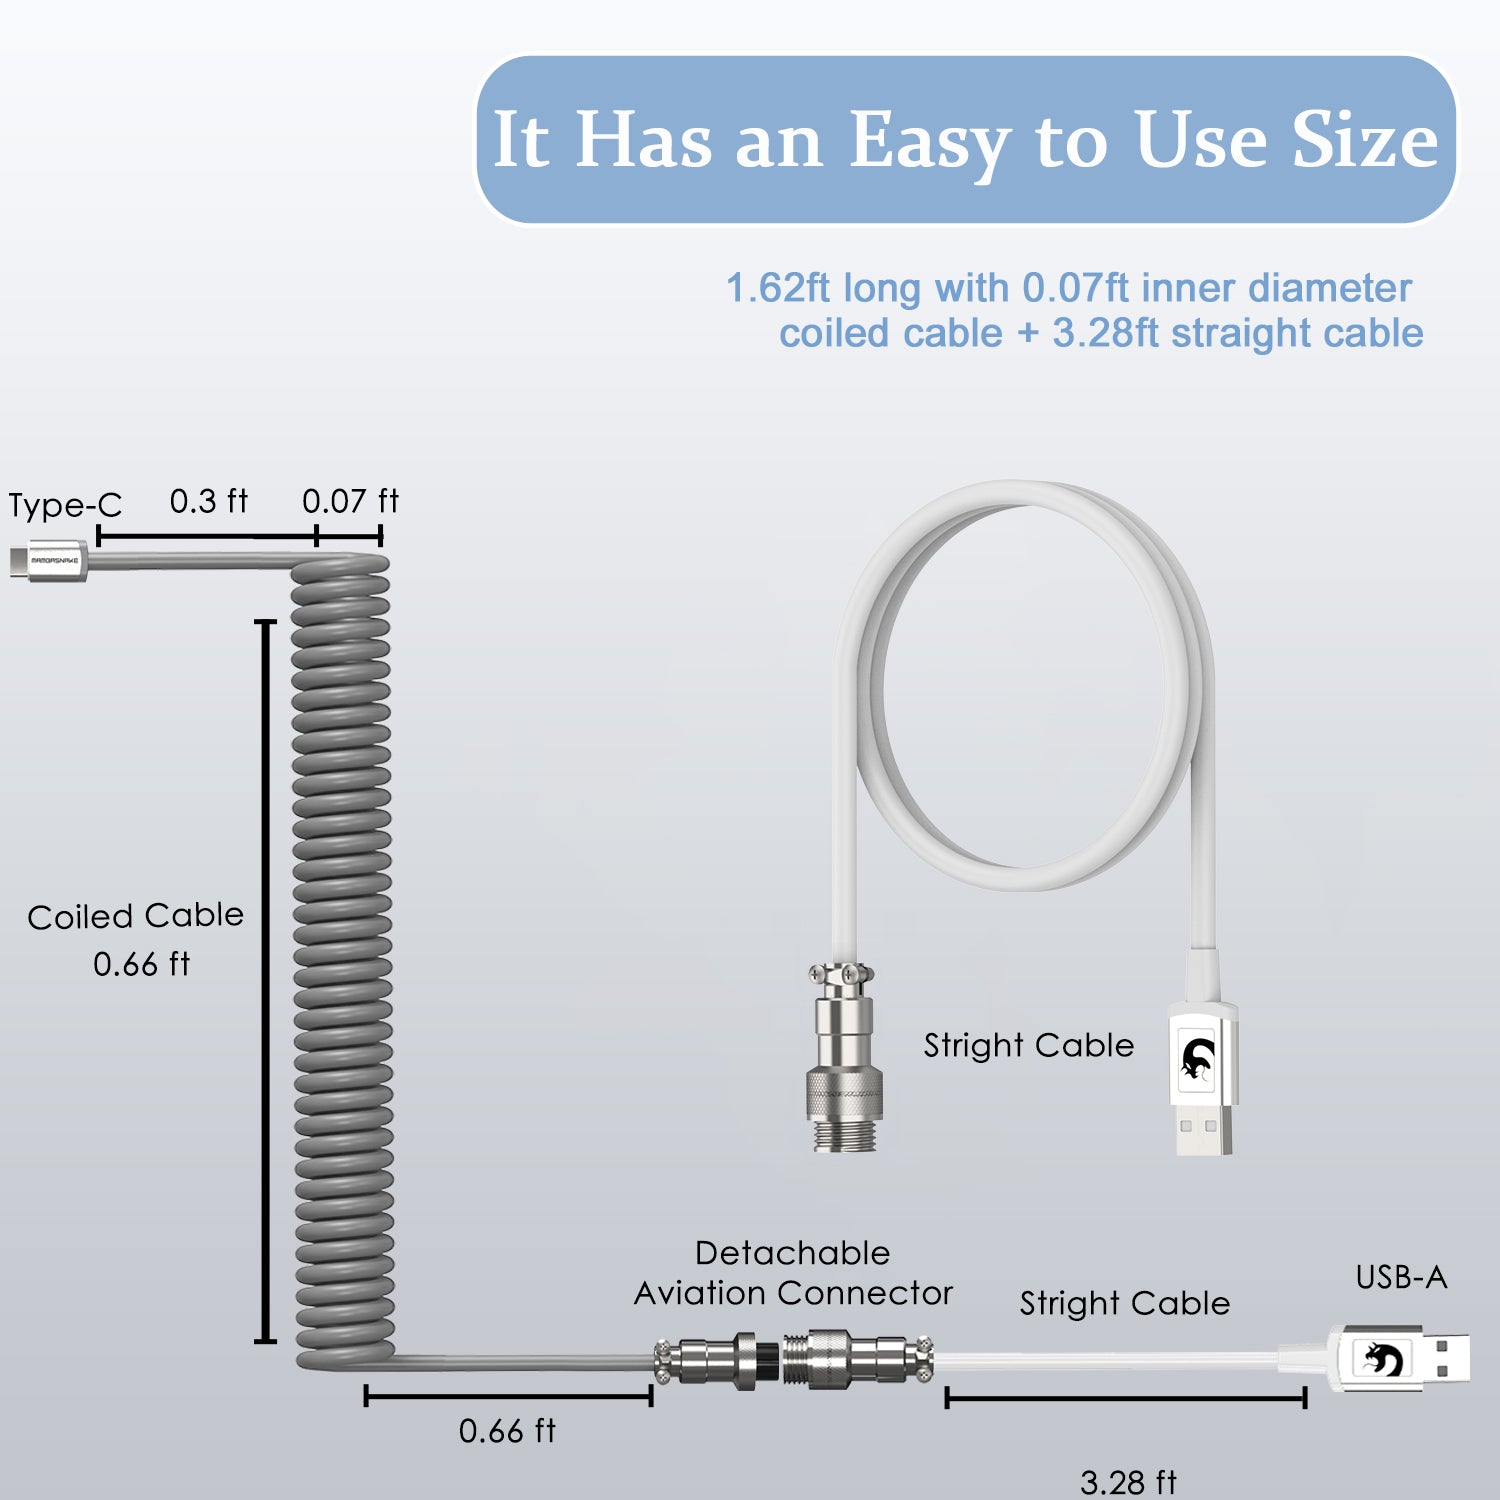 Customizable Coiled Detachable USB Keyboard Cable – MechaniKey